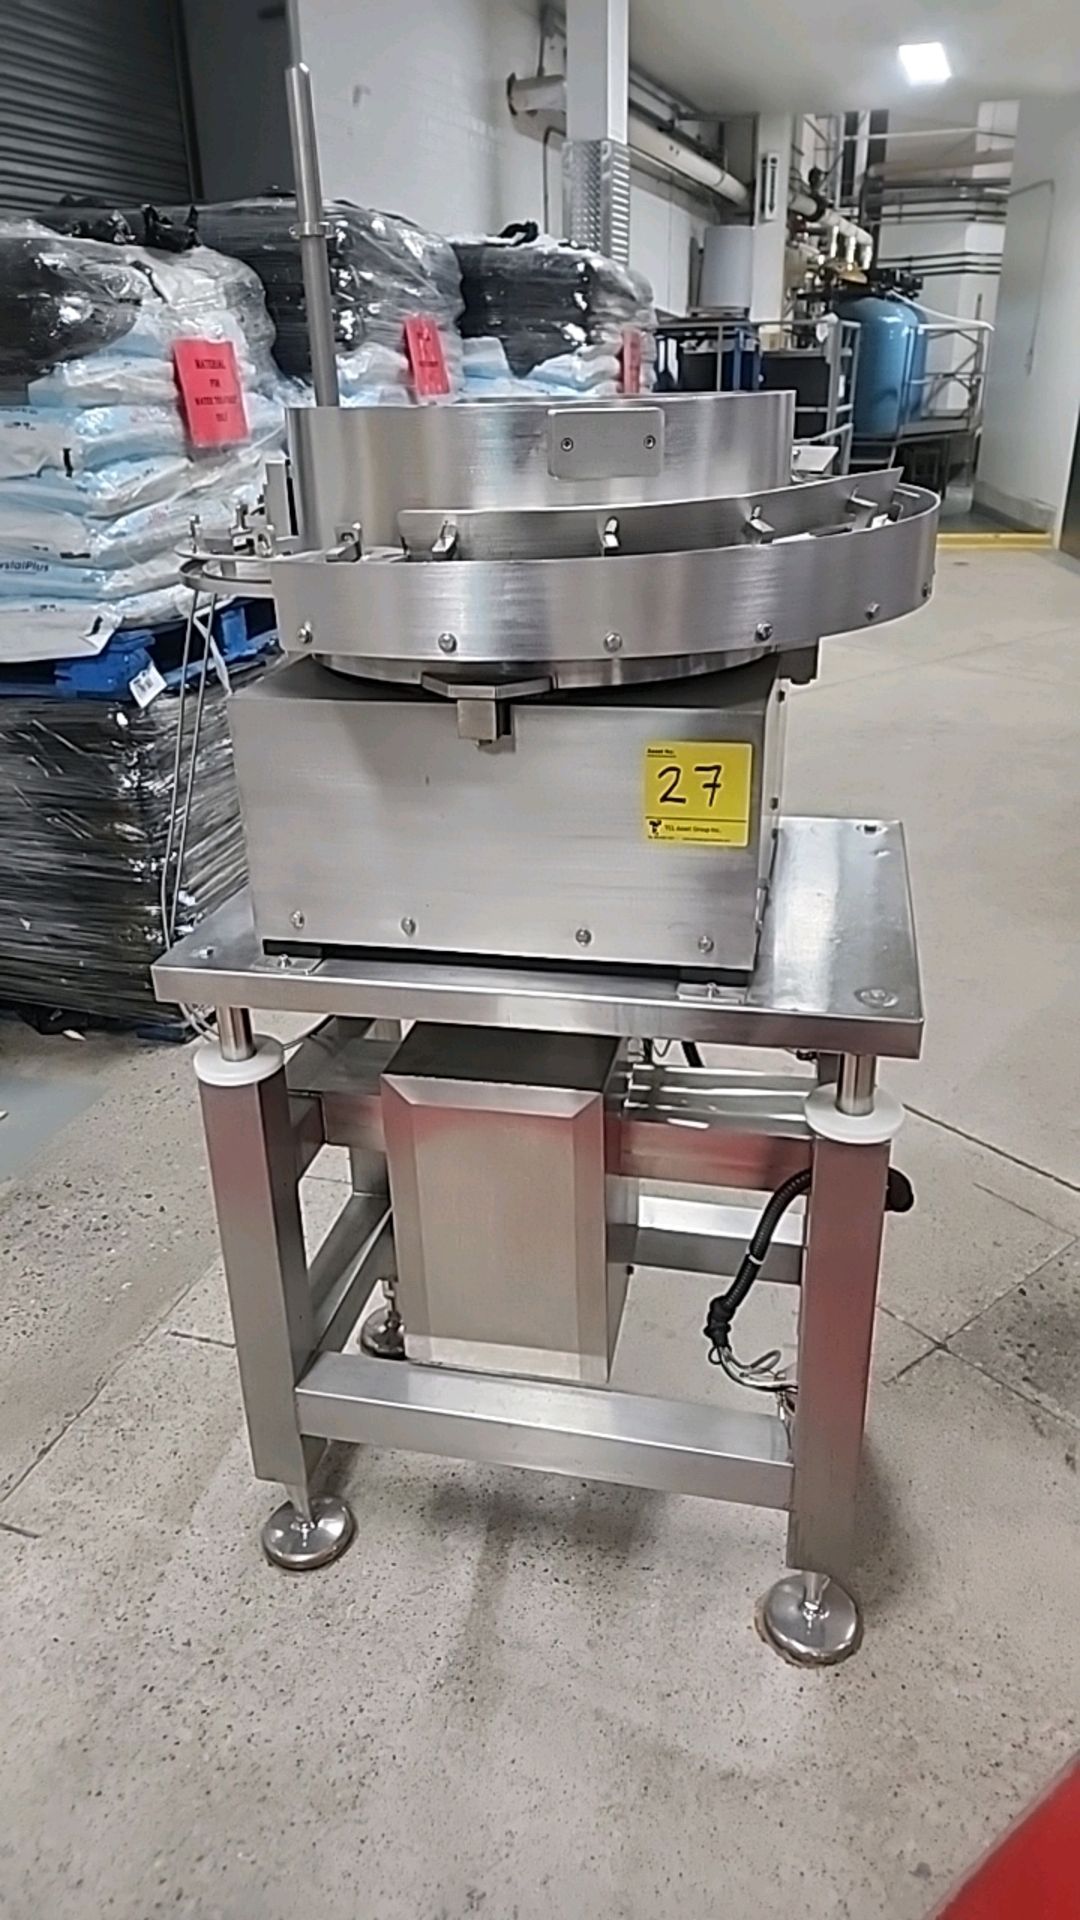 FeedRite Automation vibratory feeder, stainless steel, 18 in. dia.